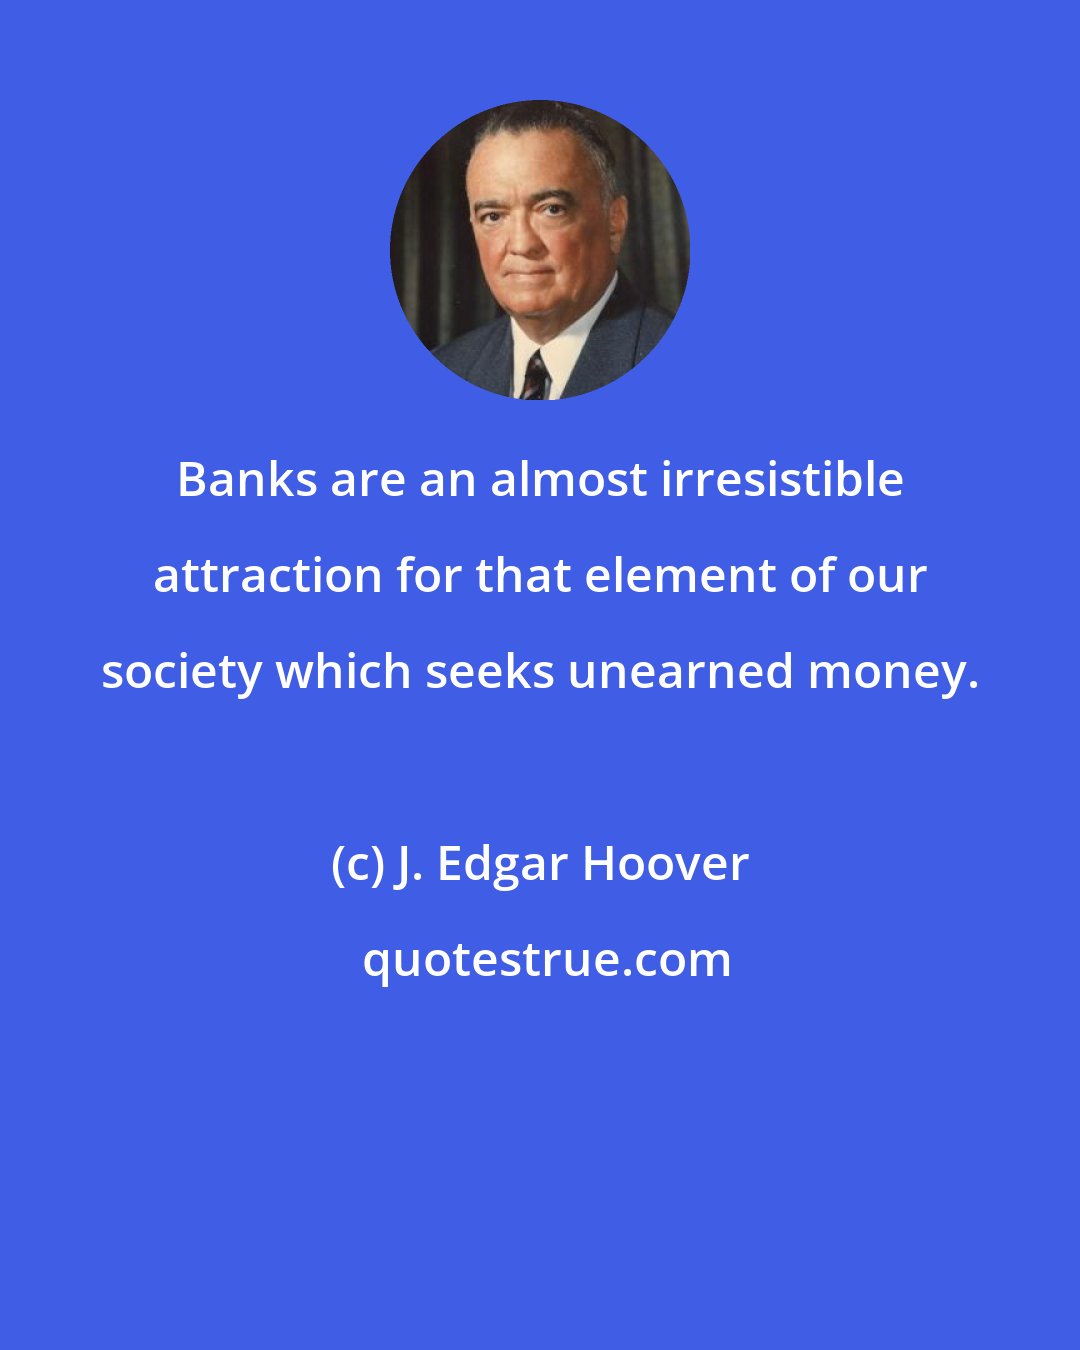 J. Edgar Hoover: Banks are an almost irresistible attraction for that element of our society which seeks unearned money.